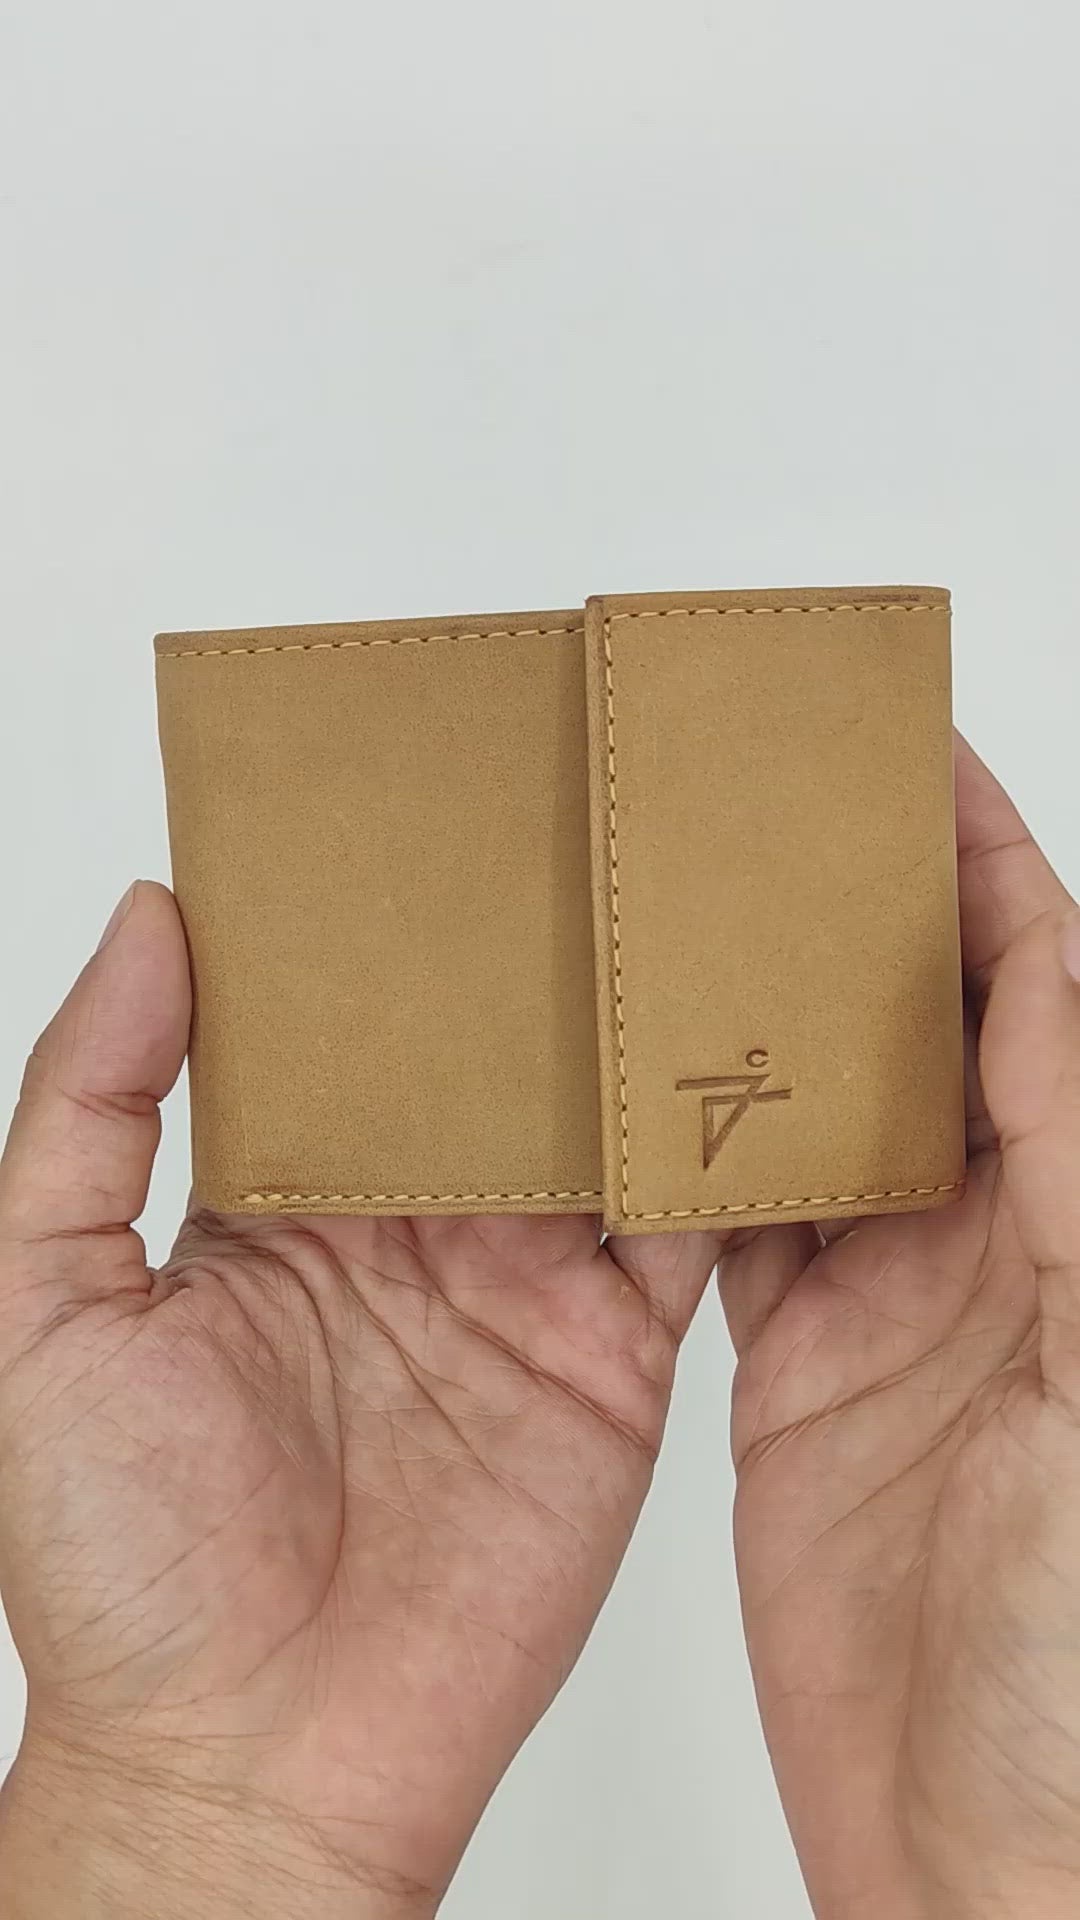 Double Sided Leather Card Holder – Espinoza's Leather